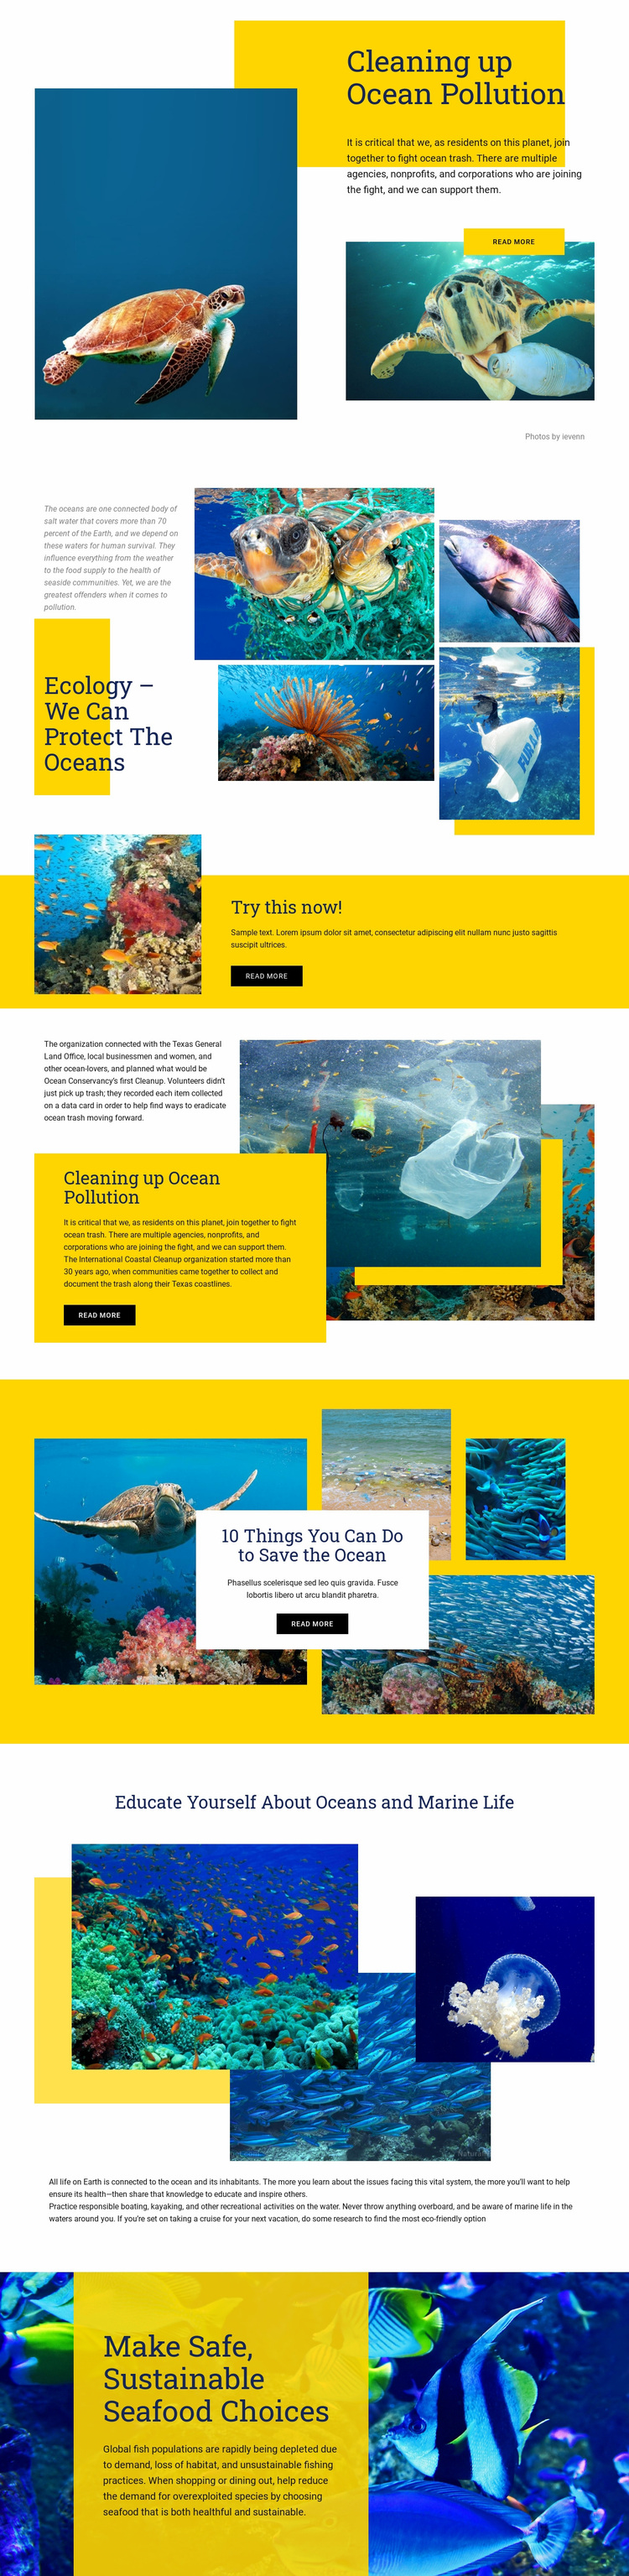 Protect The Oceans Web Page Designer